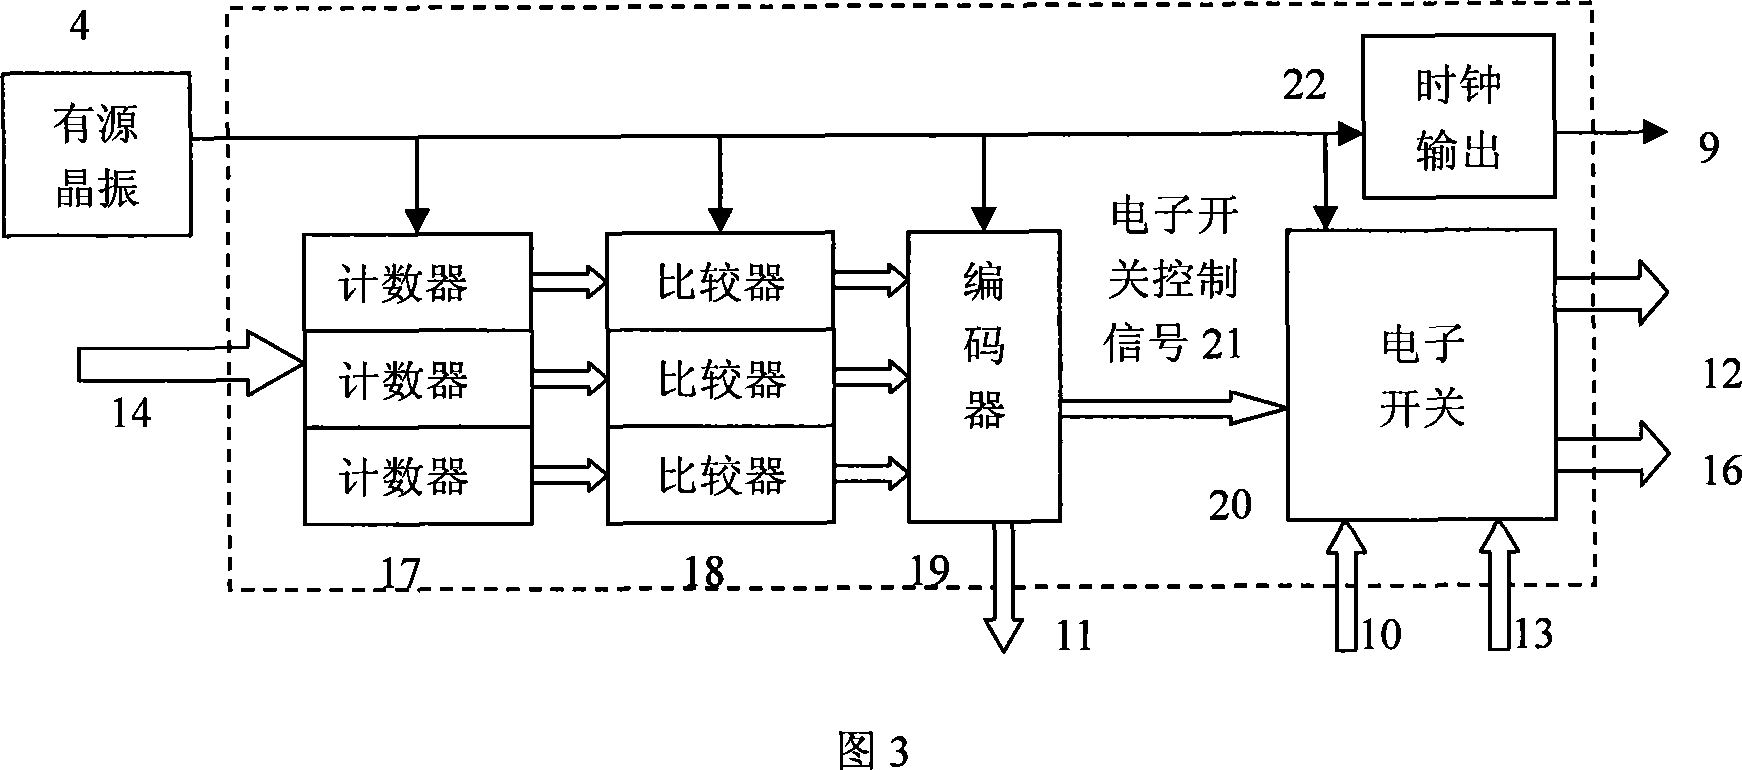 Small-sized unmanned aircraft steering engine control device